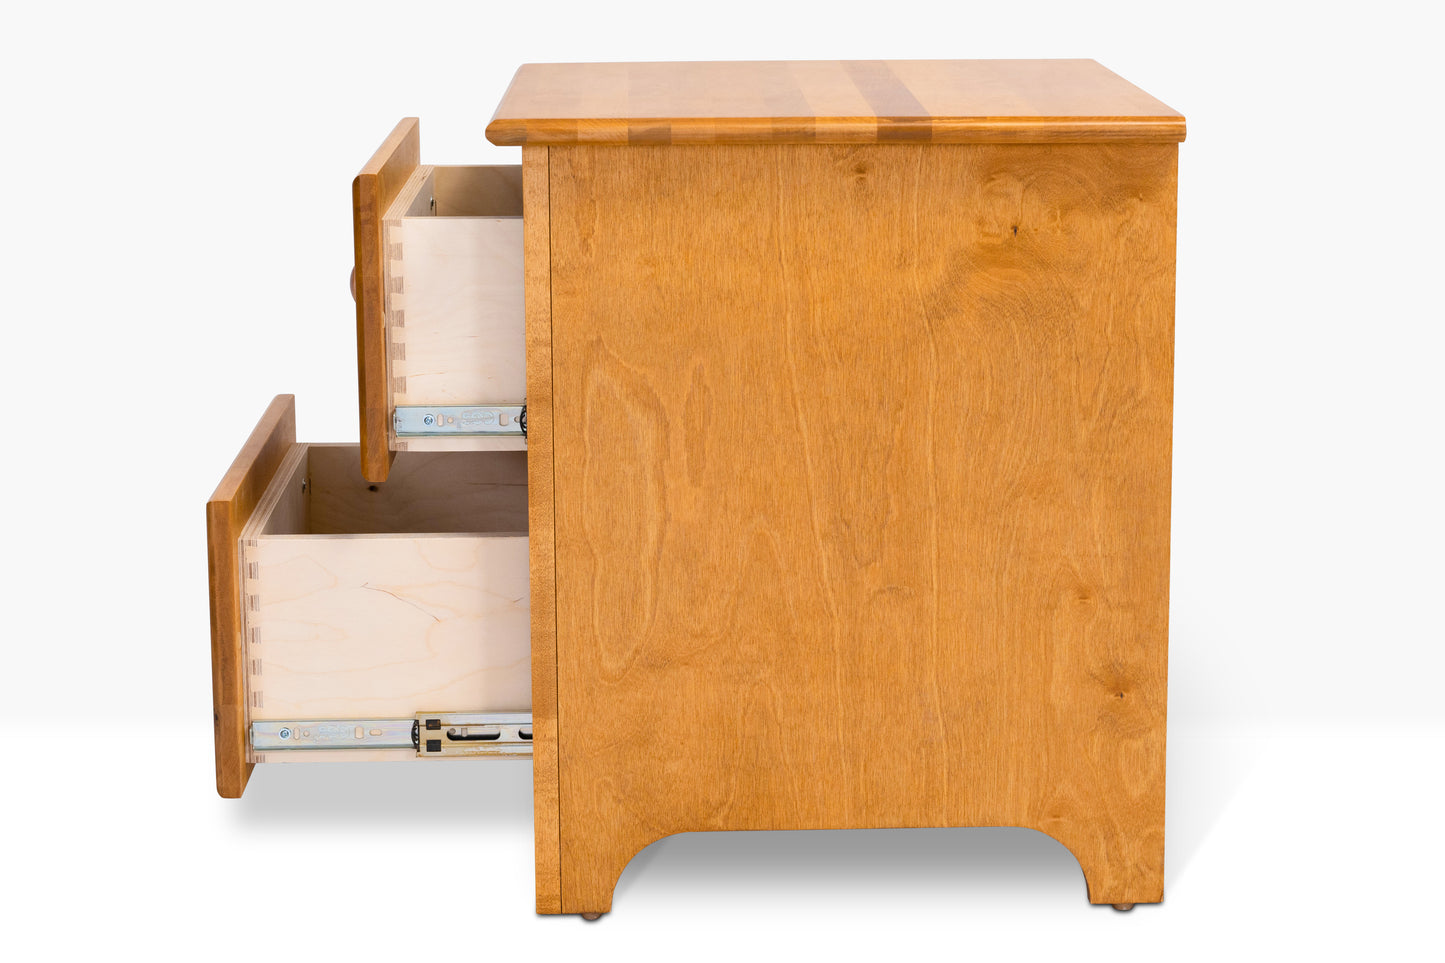 Acadia Shaker Two Drawer Nightstand is built from birch and features two drawers. Pictured in Autumn Gold finish shown with both drawers open to highlight storage space available.